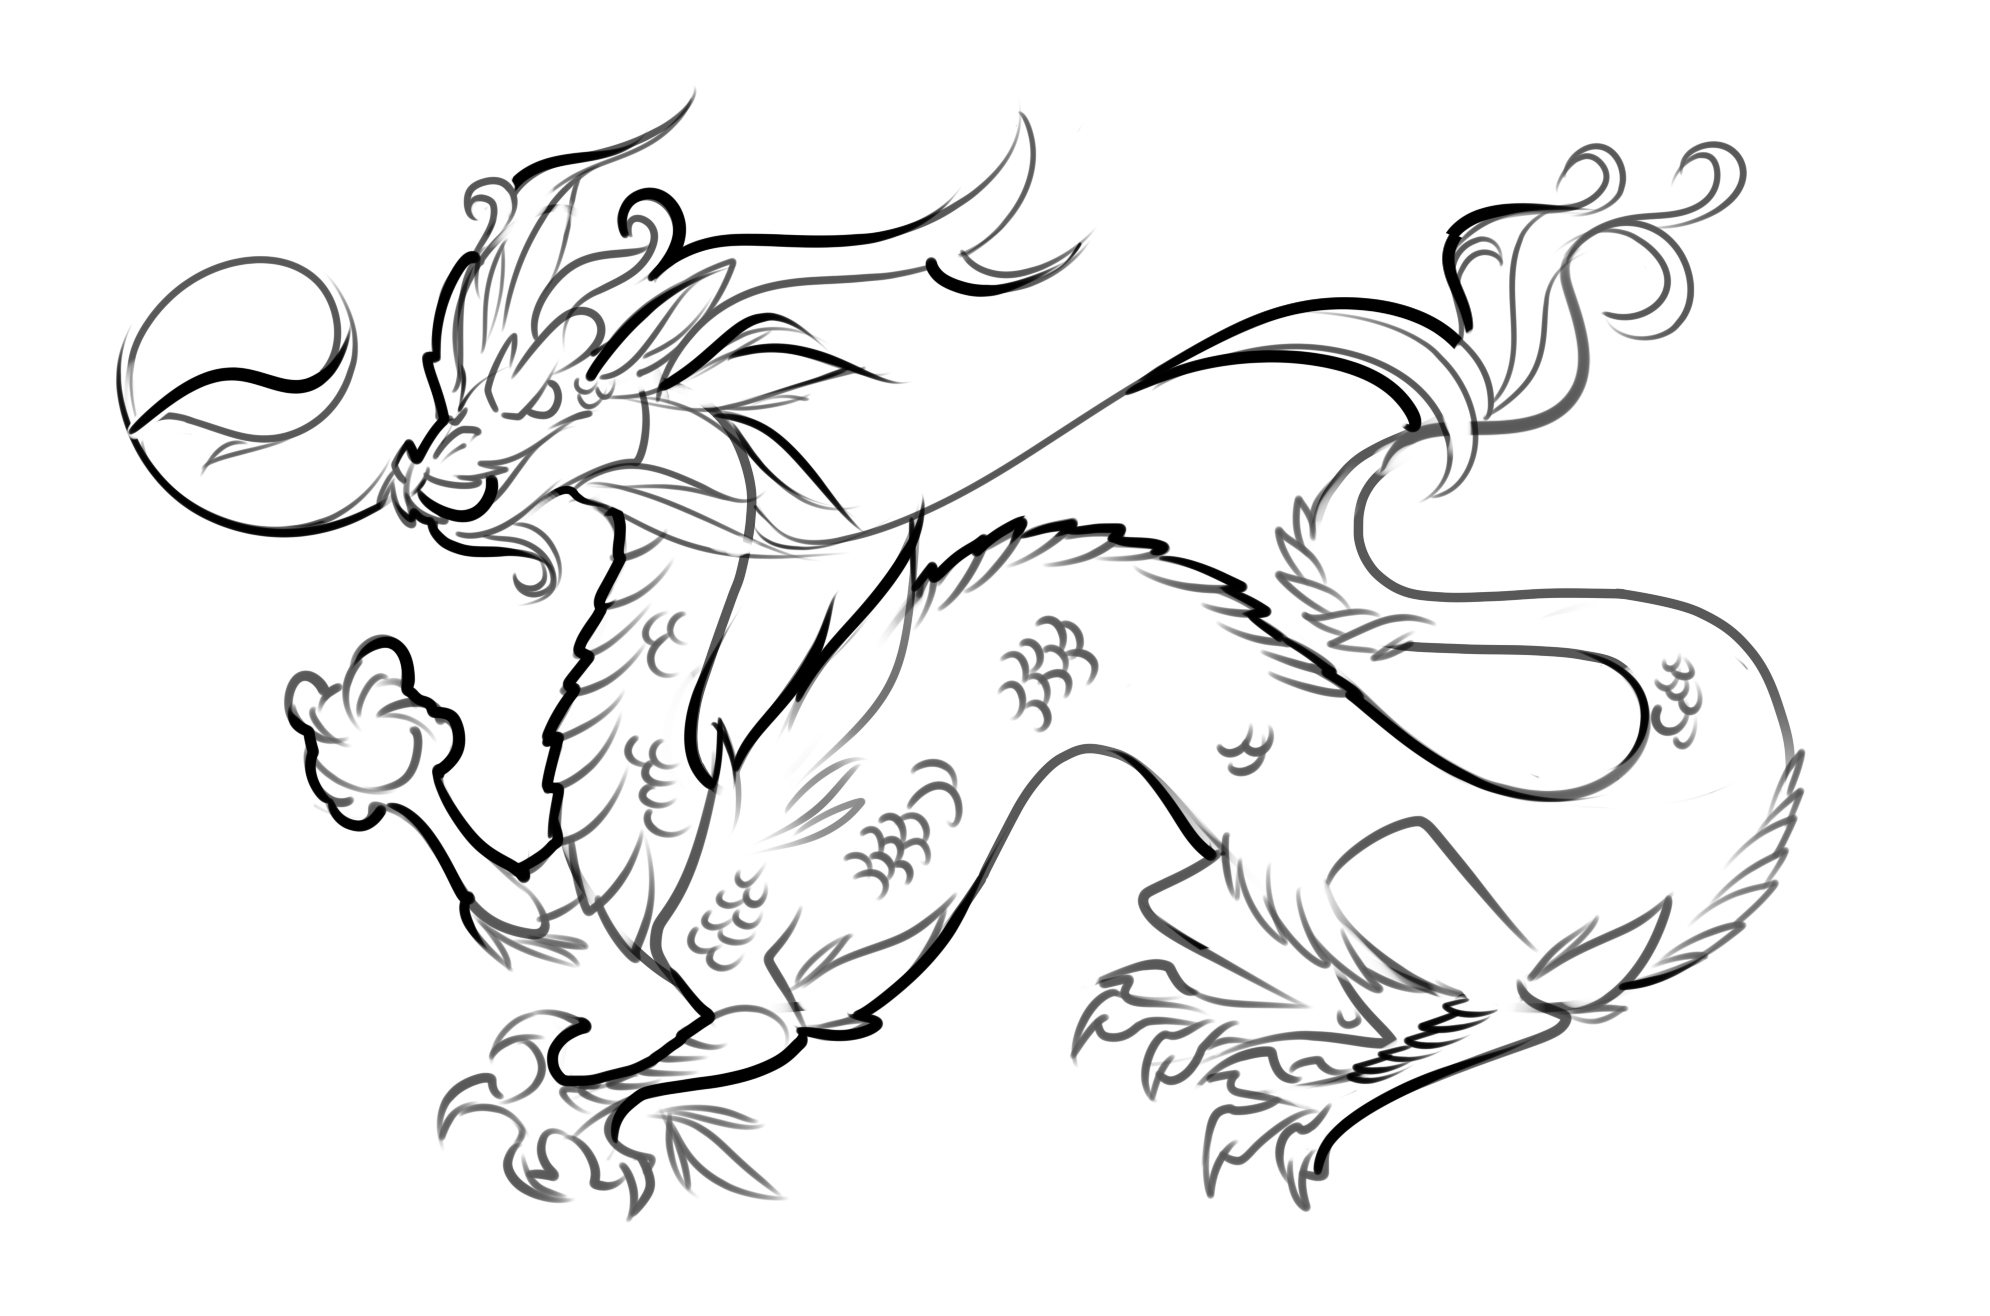 Free Printable Dragon Coloring Pages For Kids | Things That Caught - Free Printable Chinese Dragon Coloring Pages